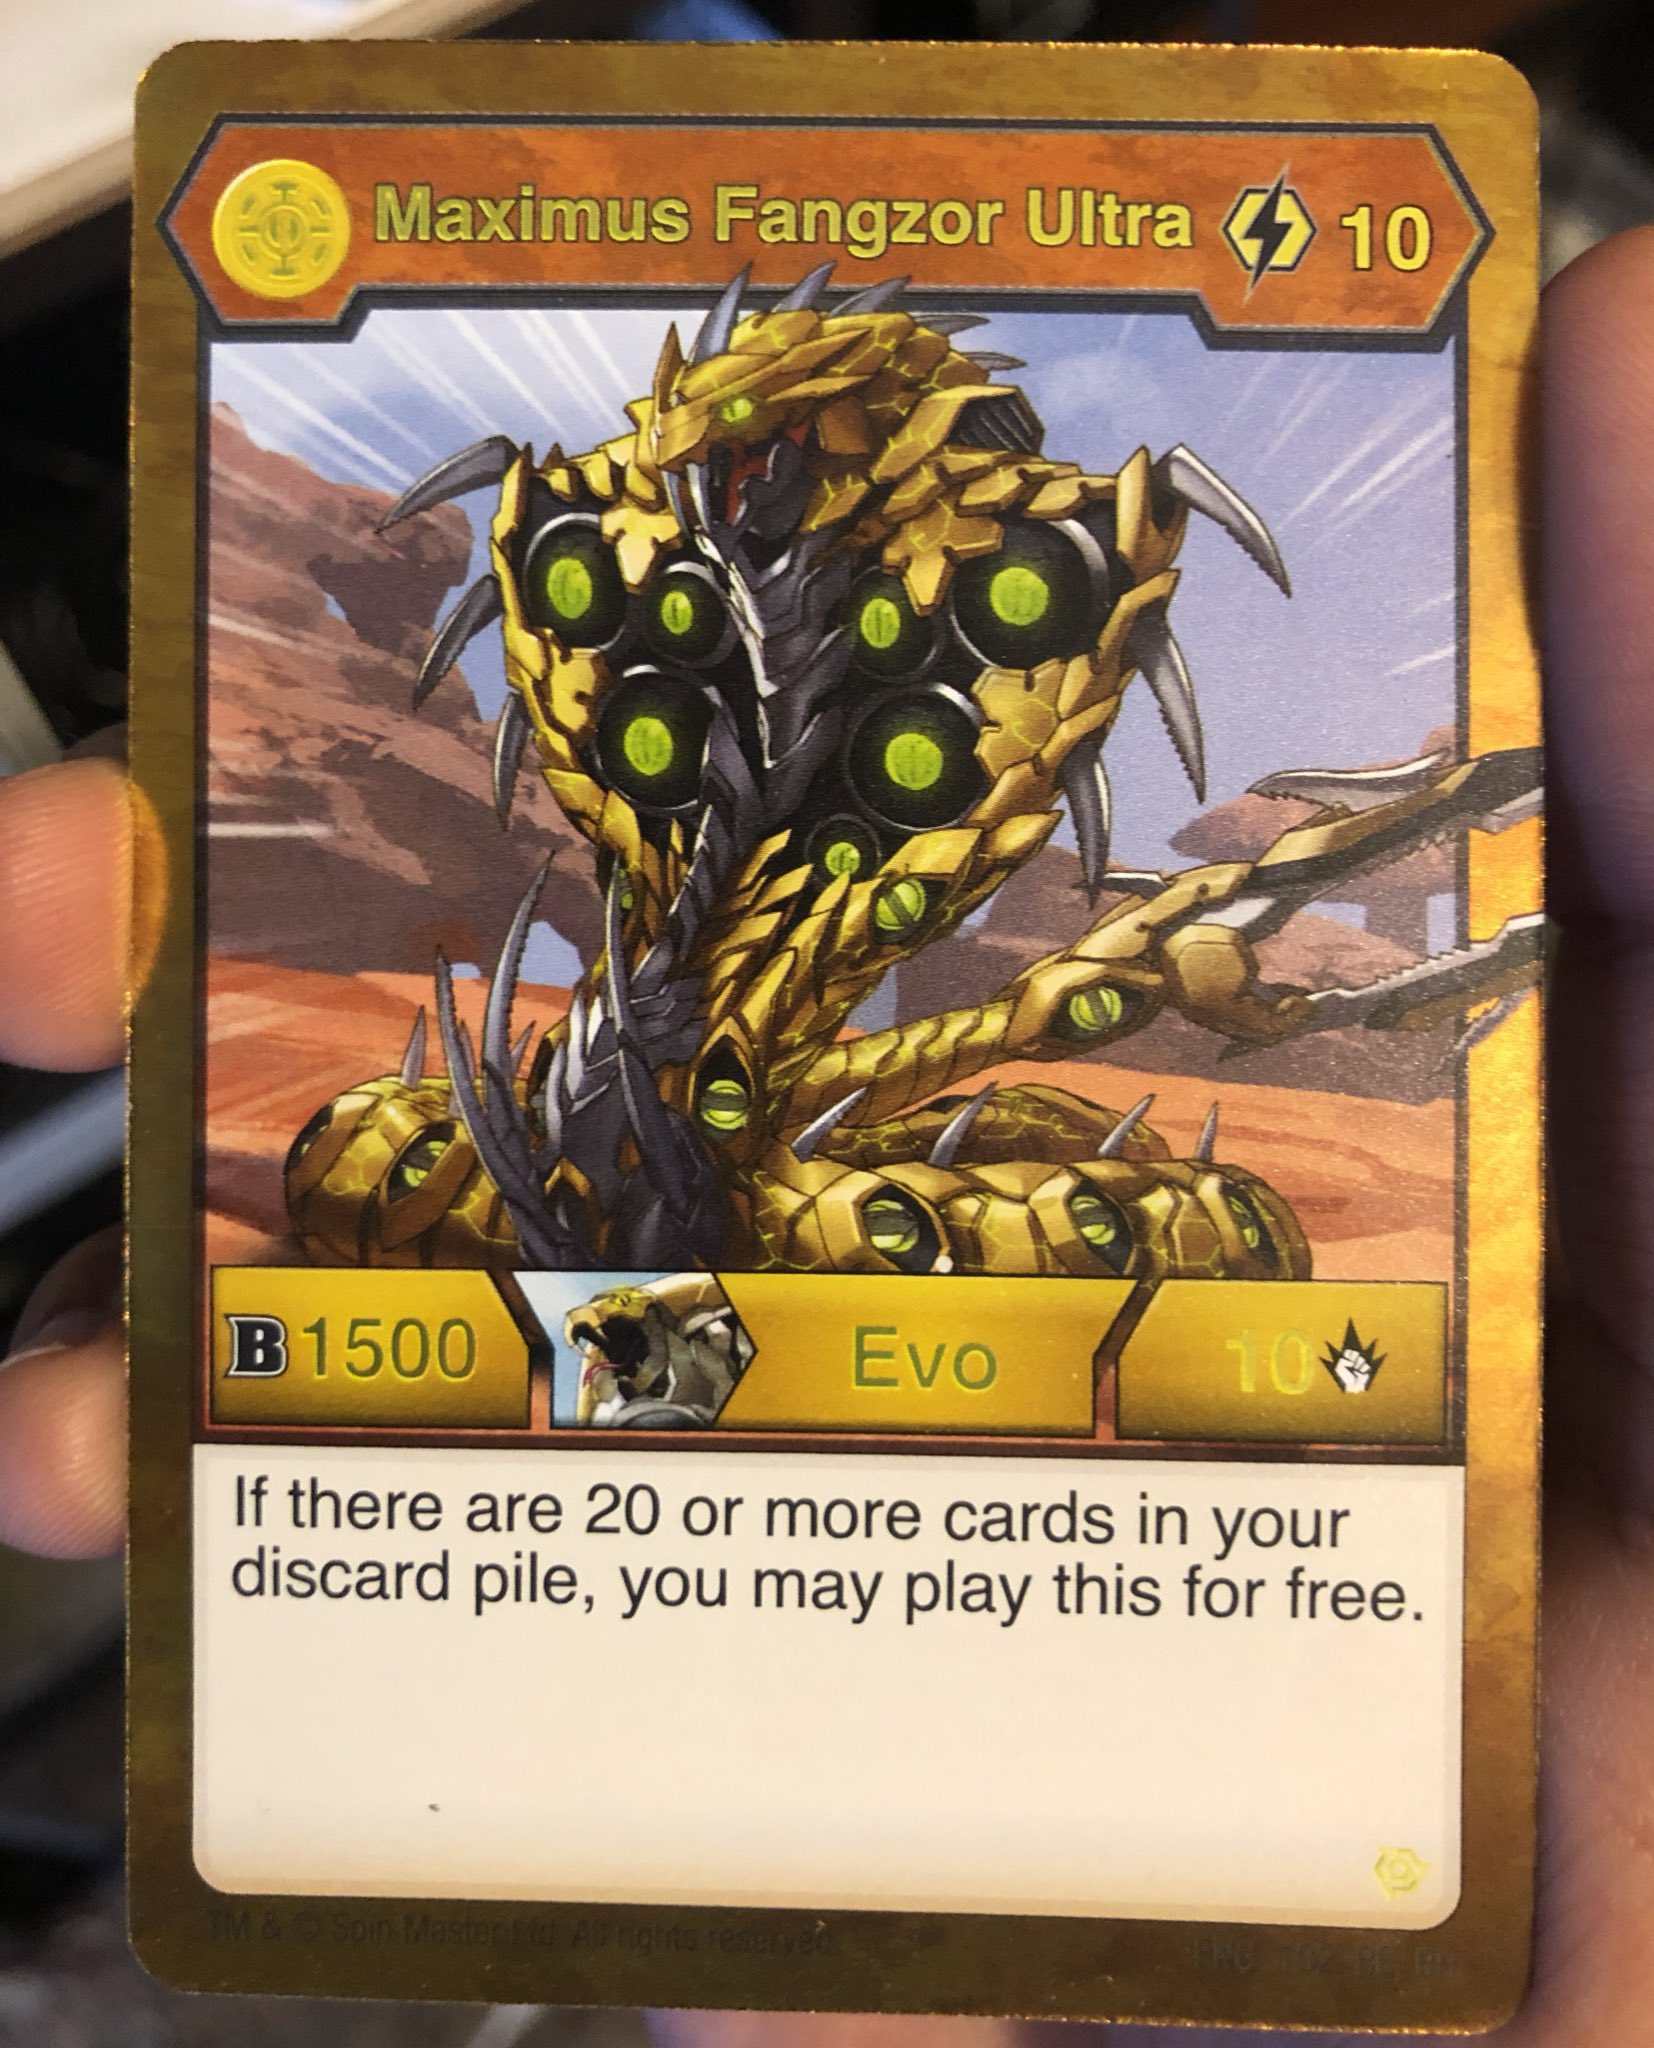 Bakugan Insider on Twitter: "Pull of the Day. Aurelus Maximus Fangzor Ultra. He comes with 1500B Power and 10 Damage. And you can play it for #bakuganbattleplanet #bakugan #bakuganbattlebrawlers #games #